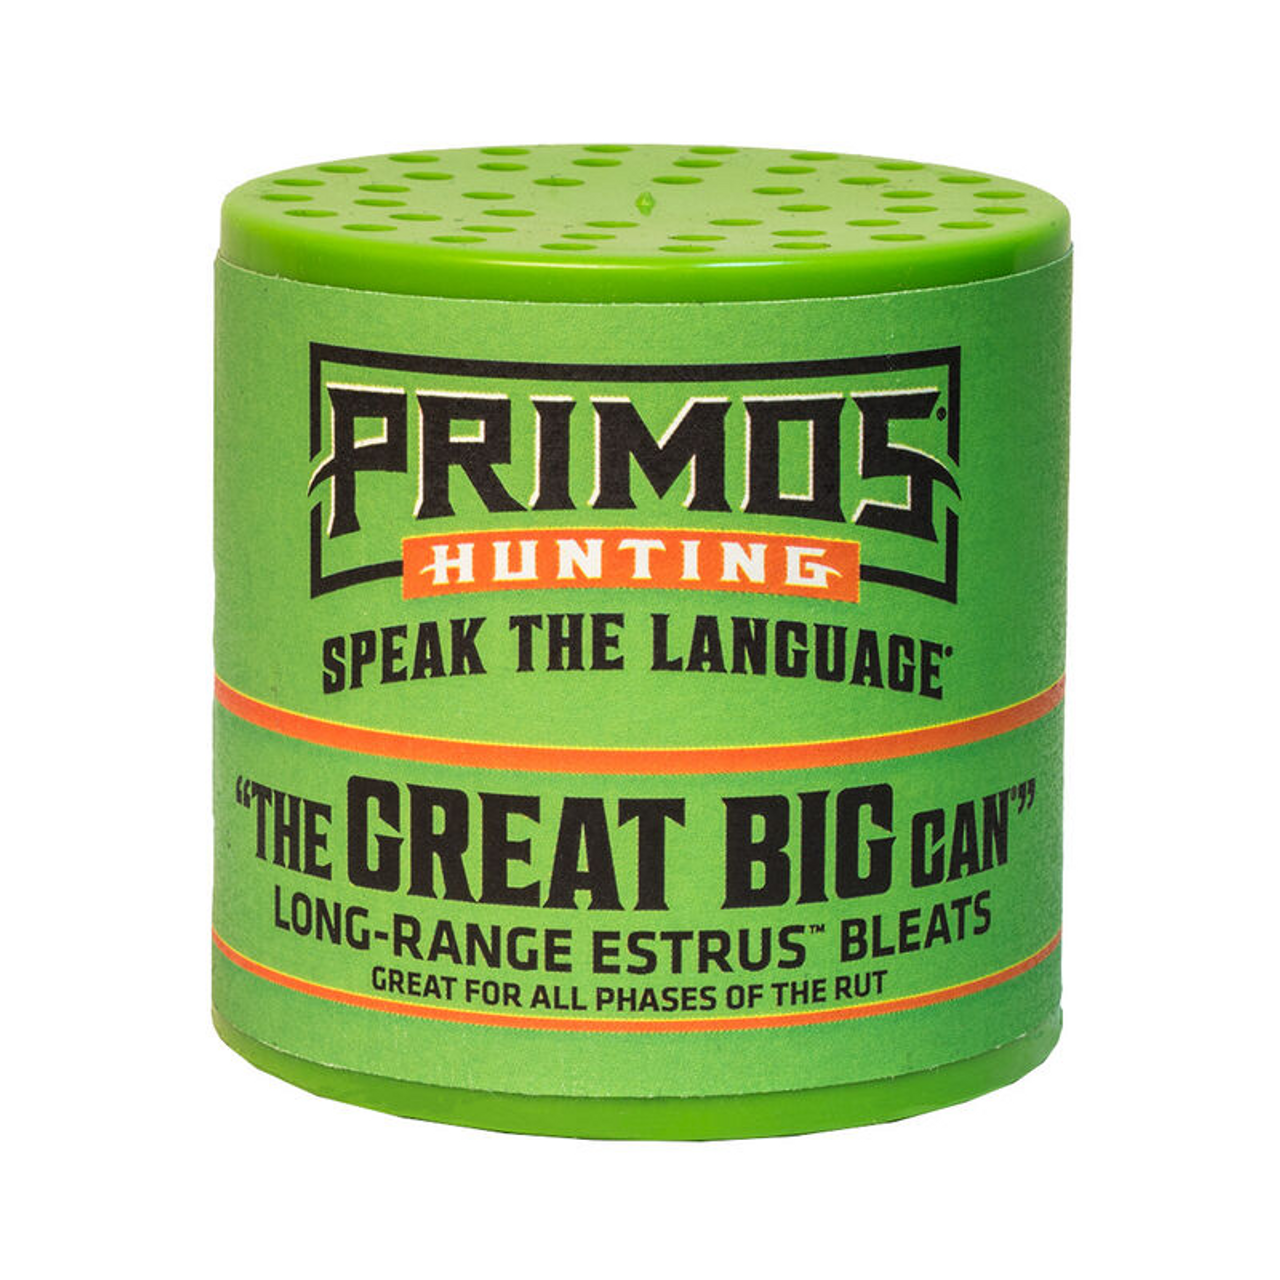 Primos 'The Great Big Can' Doe Bleat